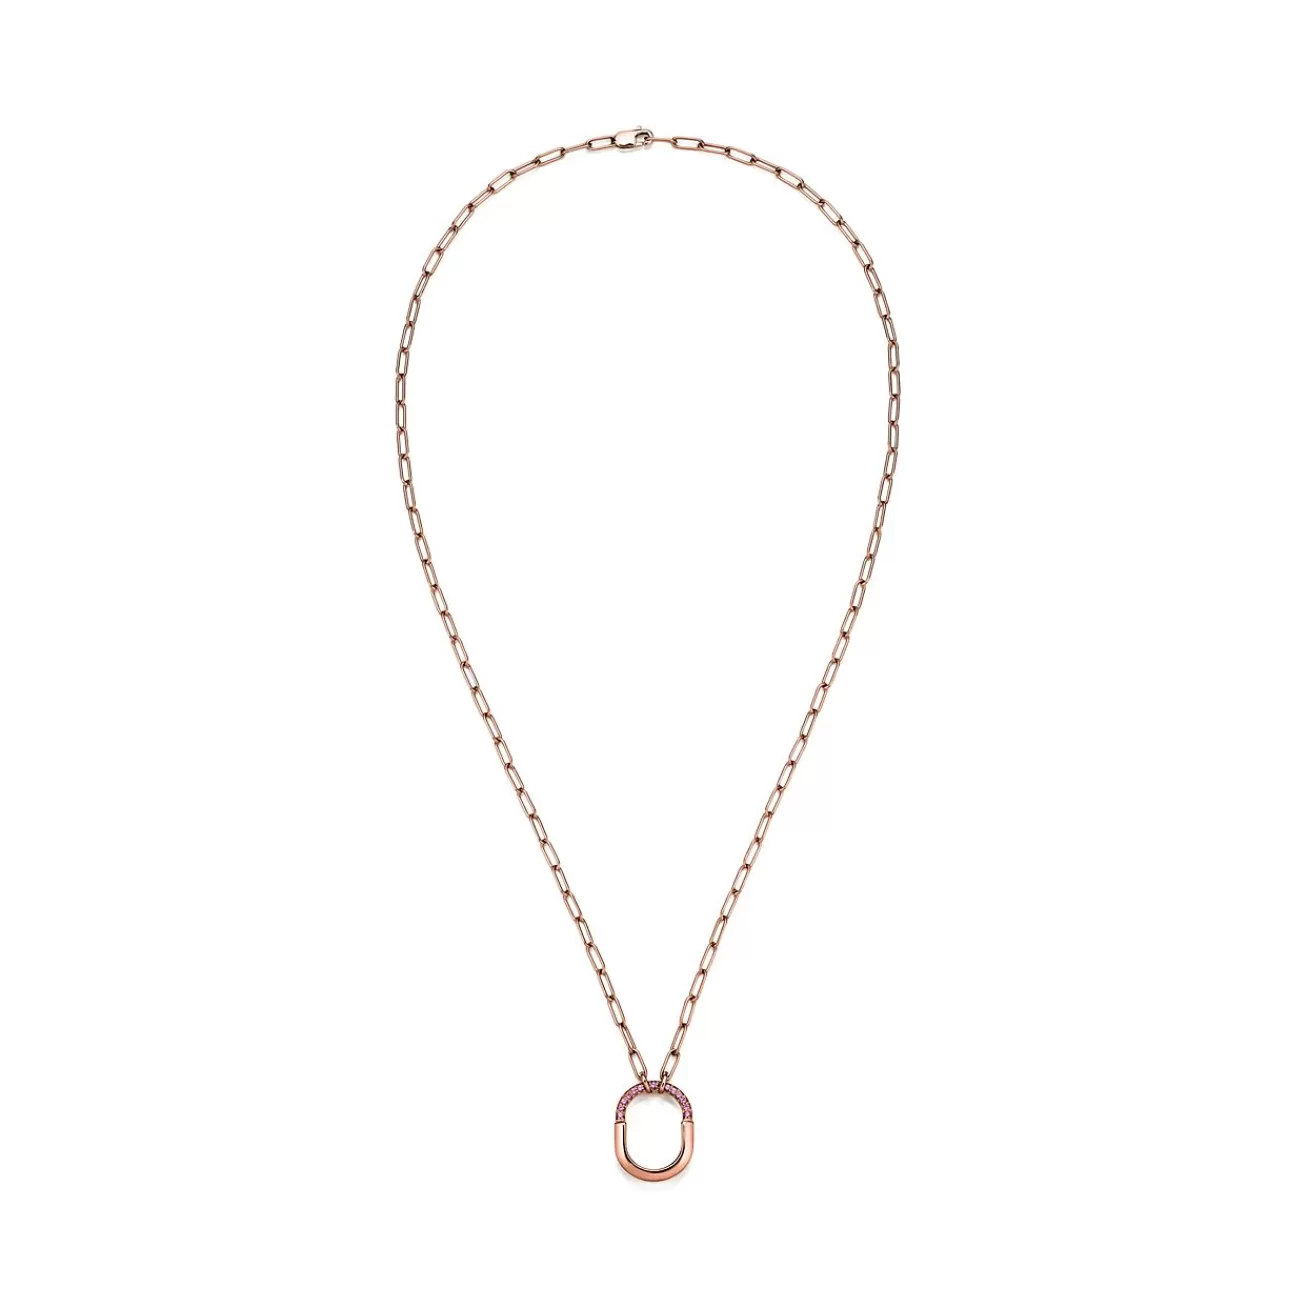 Tiffany & Co. Tiffany Lock Small Pendant in Rose Gold with Pink Sapphires | ^ Necklaces & Pendants | Gifts for Her